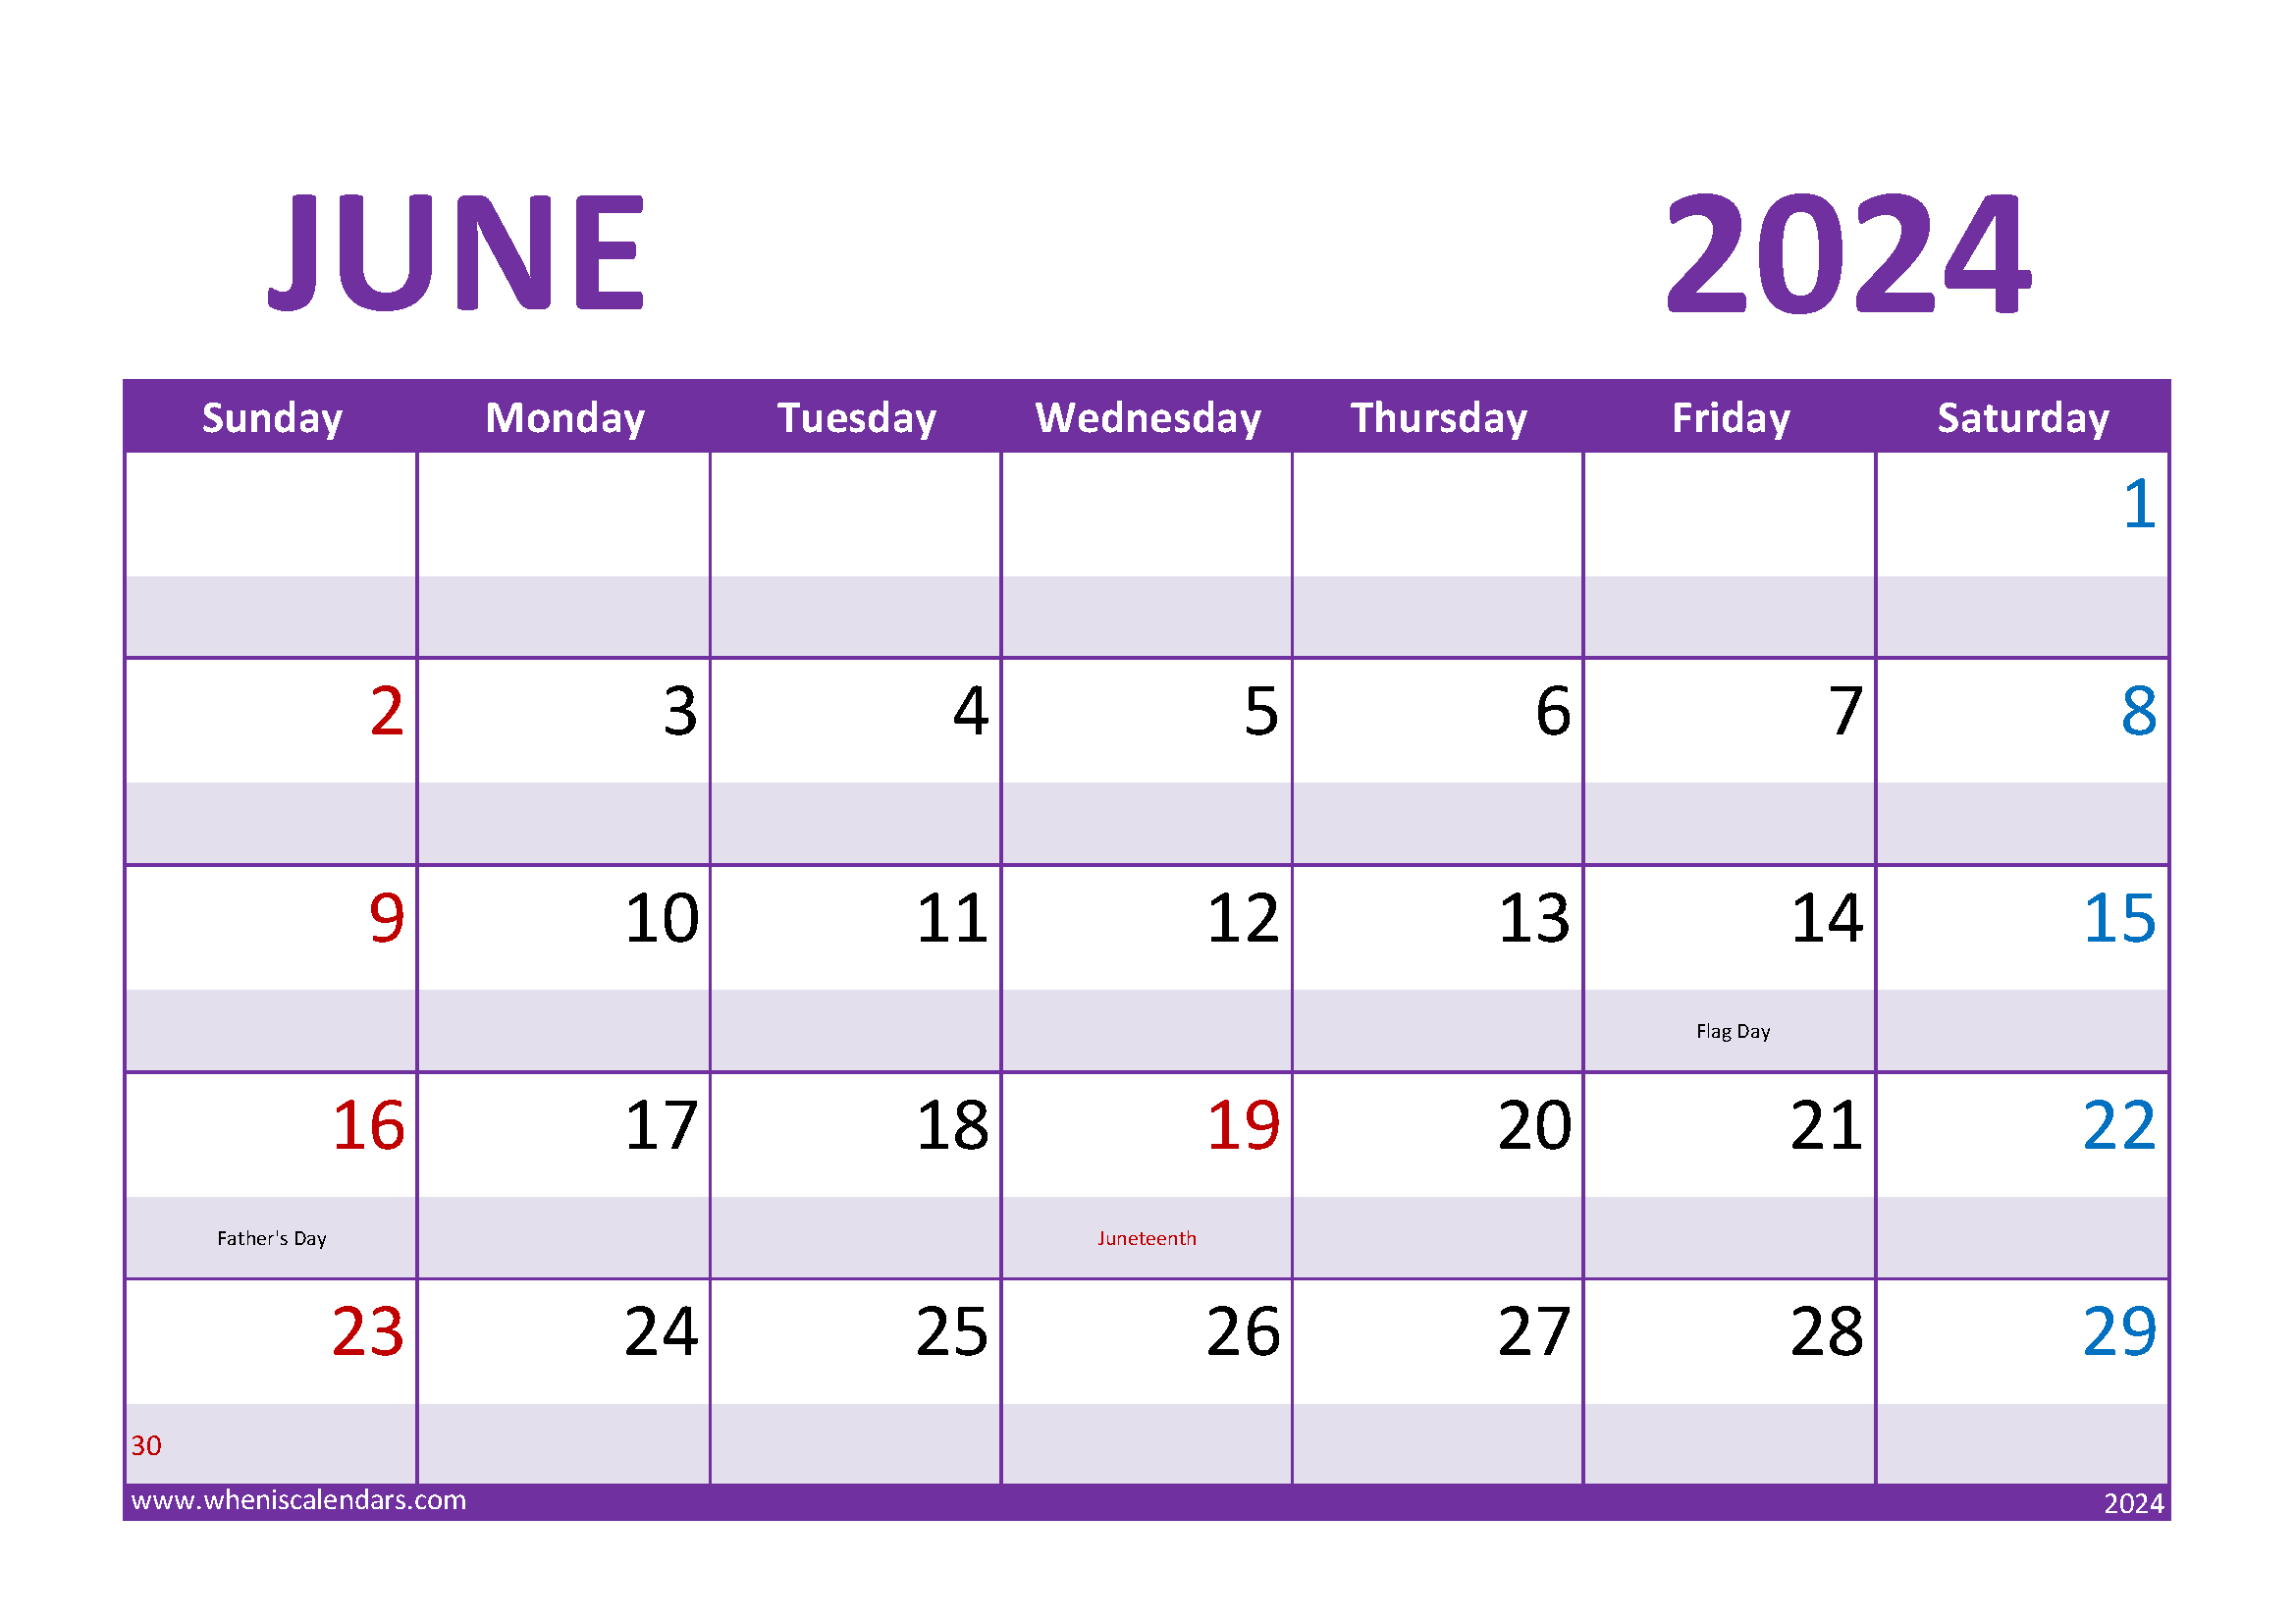 Download June Calendar 2024 with Holidays A4 Horizontal 64022